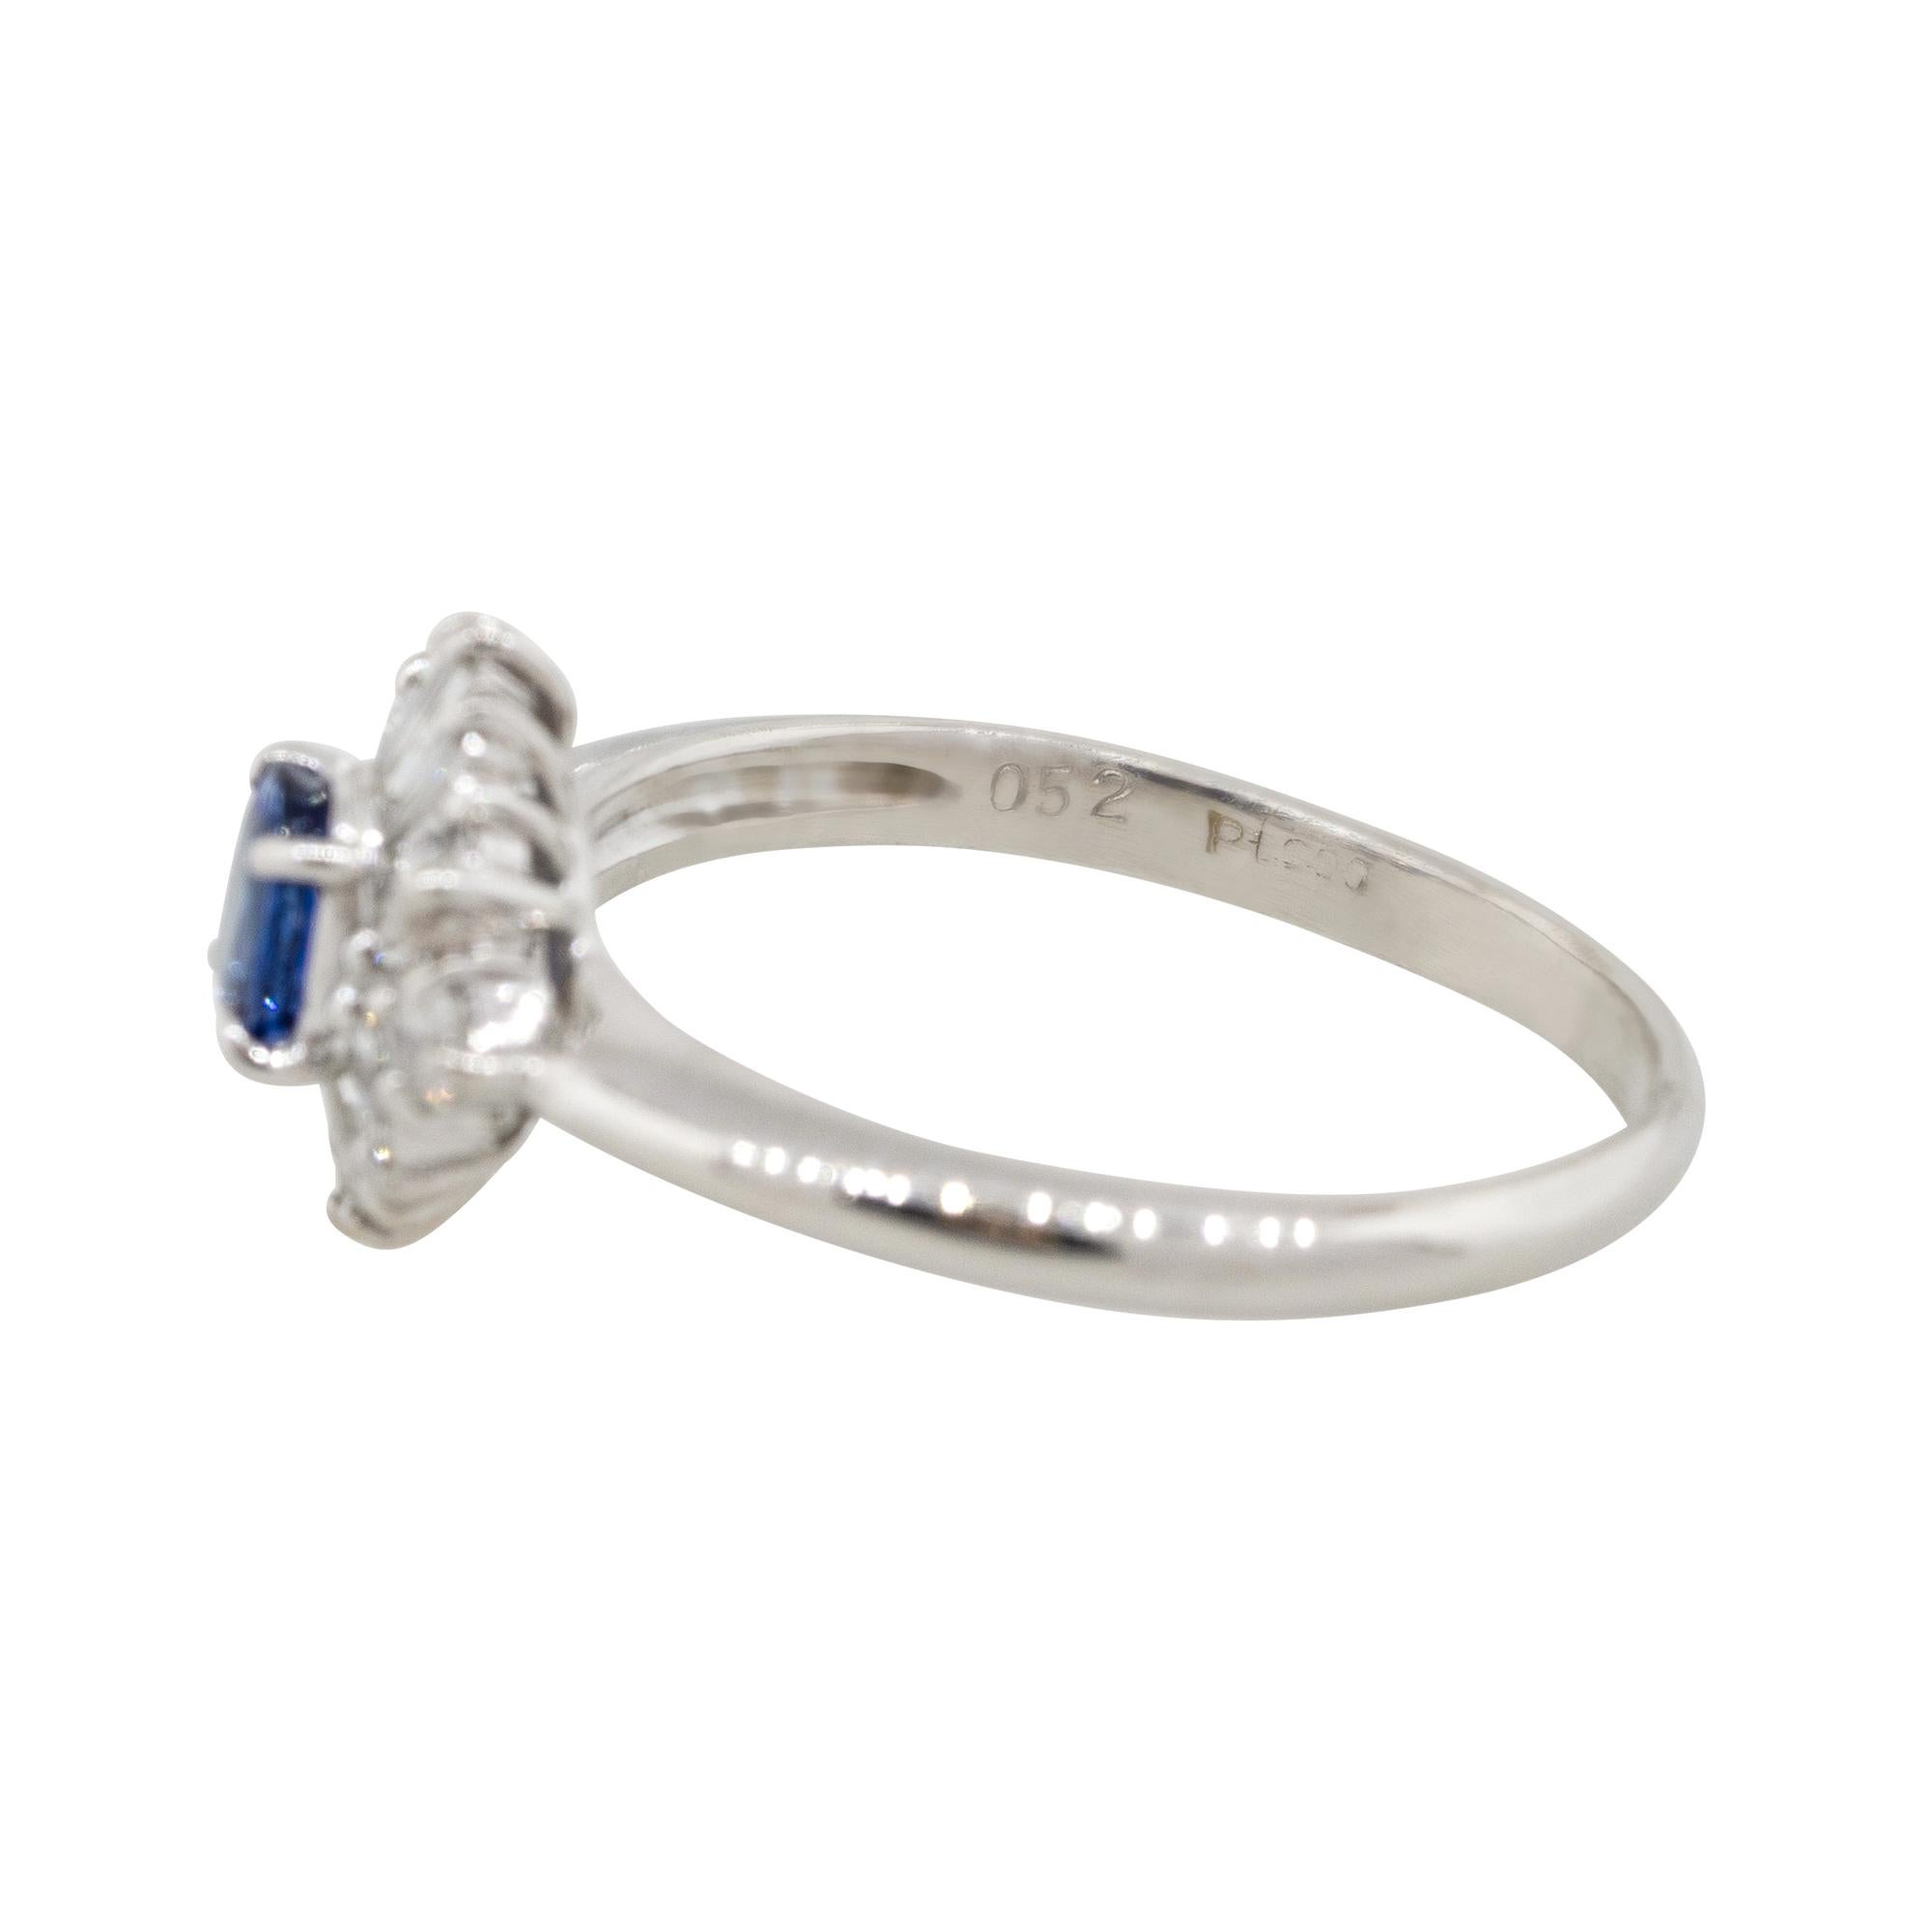 0.52 Carat Oval Cut Sapphire Center Diamond Cocktail Ring Platinum in Stock For Sale 1